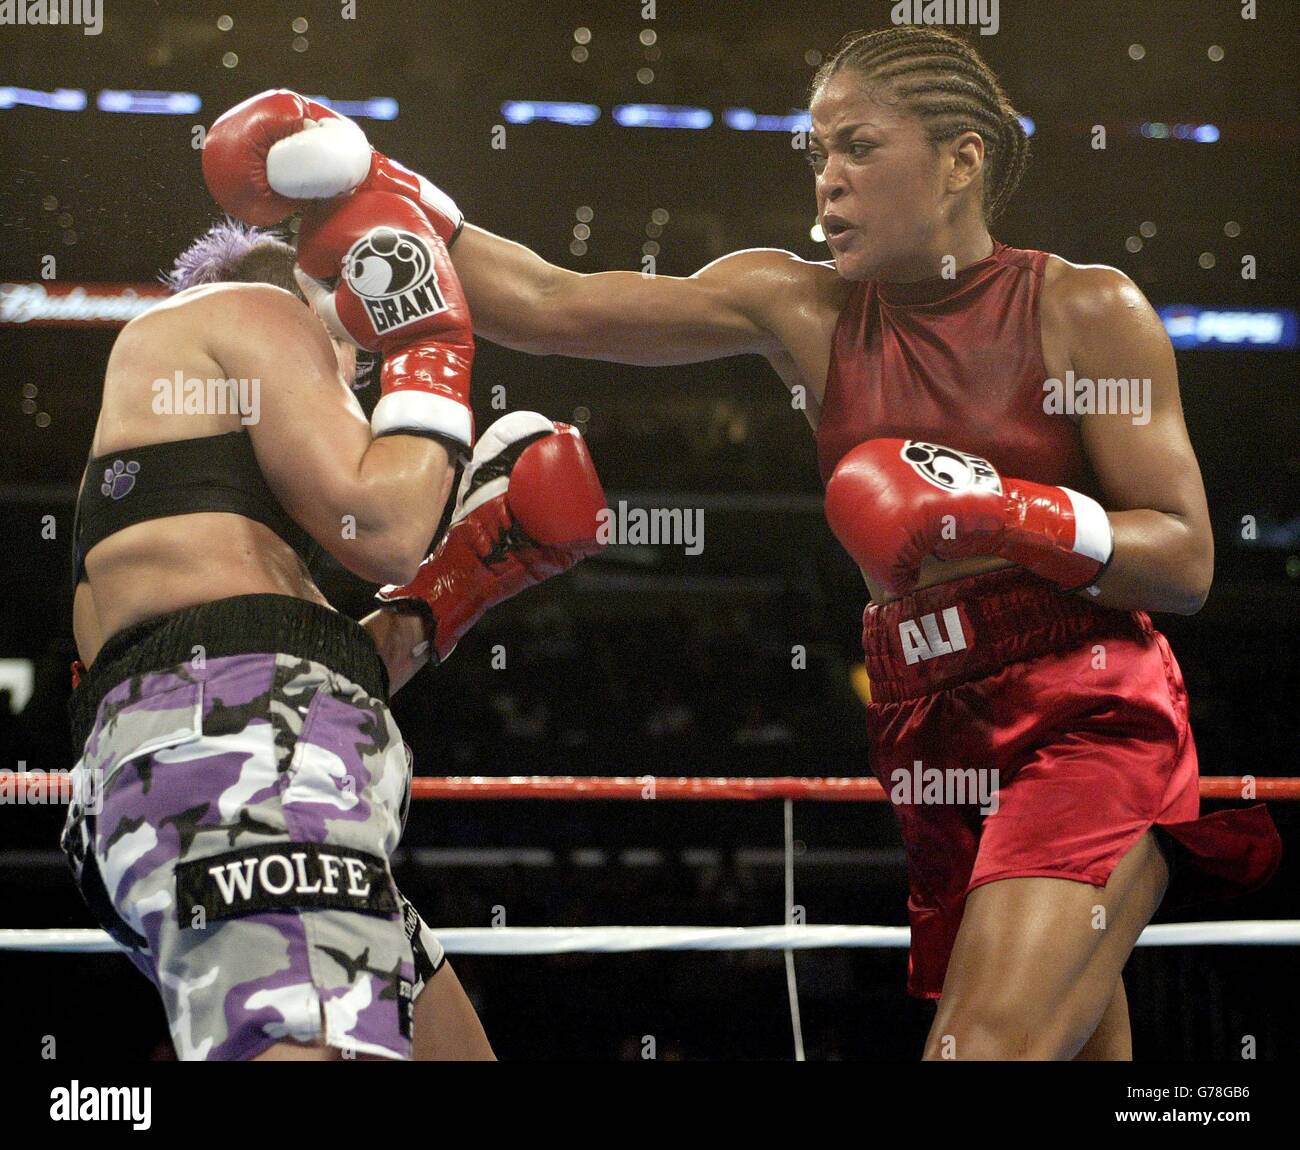 Muhammed Ali's daughter Laila Ali (right) lands right hand punch to Valerie Mahfood, during Ali's 6th round TKO victory in Super-Middleweight at the Staples Centre Arena in Los Angeles. Stock Photo